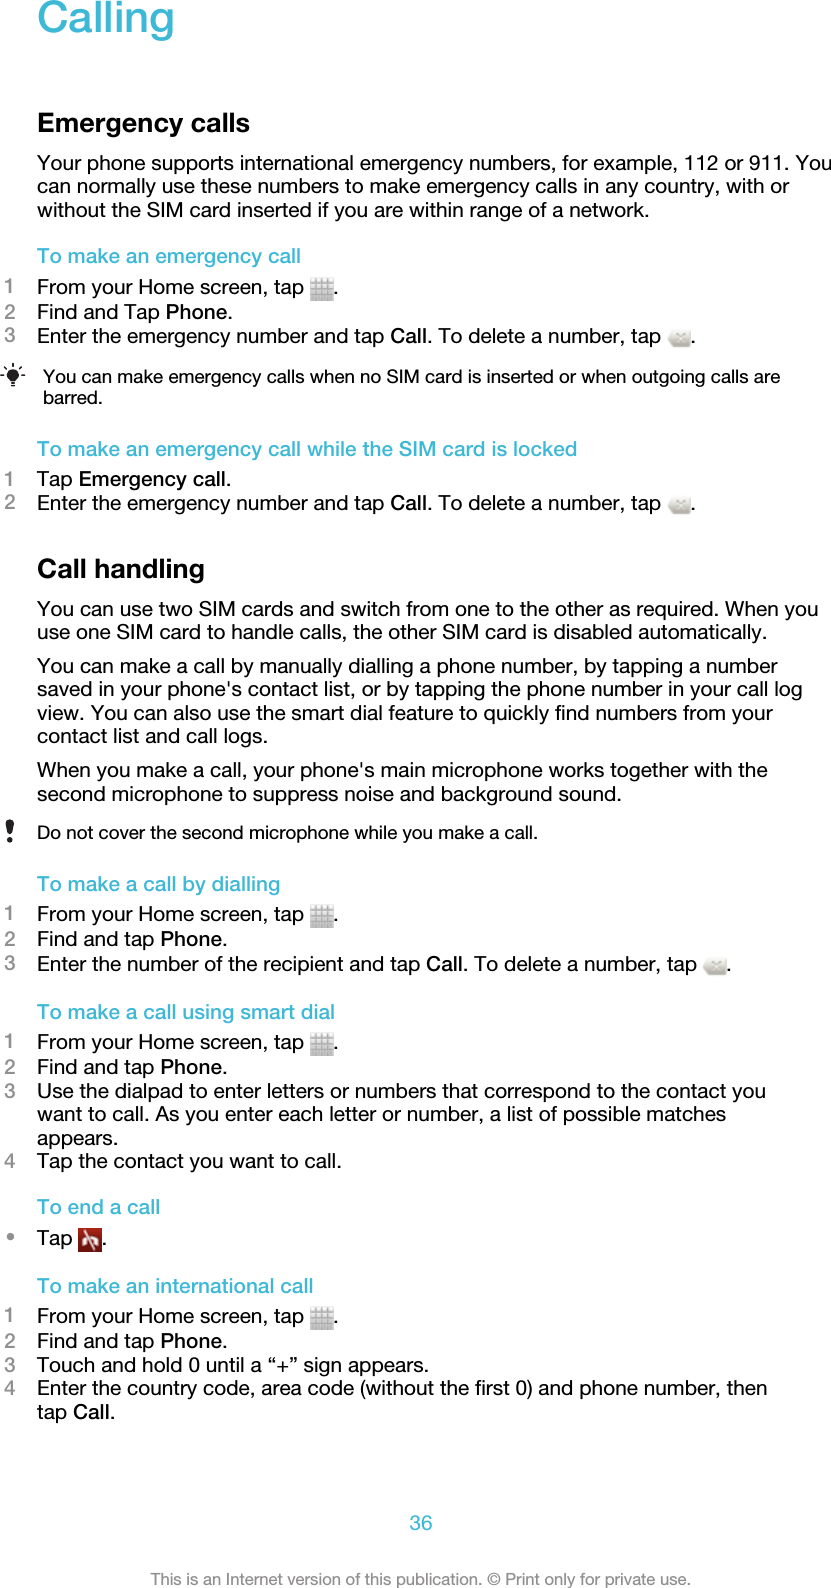 CallingEmergency callsYour phone supports international emergency numbers, for example, 112 or 911. Youcan normally use these numbers to make emergency calls in any country, with orwithout the SIM card inserted if you are within range of a network.To make an emergency call1From your Home screen, tap  .2Find and Tap Phone.3Enter the emergency number and tap Call. To delete a number, tap  .You can make emergency calls when no SIM card is inserted or when outgoing calls arebarred.To make an emergency call while the SIM card is locked1Tap Emergency call.2Enter the emergency number and tap Call. To delete a number, tap  .Call handlingYou can use two SIM cards and switch from one to the other as required. When youuse one SIM card to handle calls, the other SIM card is disabled automatically.You can make a call by manually dialling a phone number, by tapping a numbersaved in your phone&apos;s contact list, or by tapping the phone number in your call logview. You can also use the smart dial feature to quickly find numbers from yourcontact list and call logs.When you make a call, your phone&apos;s main microphone works together with thesecond microphone to suppress noise and background sound.Do not cover the second microphone while you make a call.To make a call by dialling1From your Home screen, tap  .2Find and tap Phone.3Enter the number of the recipient and tap Call. To delete a number, tap  .To make a call using smart dial1From your Home screen, tap  .2Find and tap Phone.3Use the dialpad to enter letters or numbers that correspond to the contact youwant to call. As you enter each letter or number, a list of possible matchesappears.4Tap the contact you want to call.To end a call•Tap  .To make an international call1From your Home screen, tap  .2Find and tap Phone.3Touch and hold 0 until a “+” sign appears.4Enter the country code, area code (without the first 0) and phone number, thentap Call.36This is an Internet version of this publication. © Print only for private use.